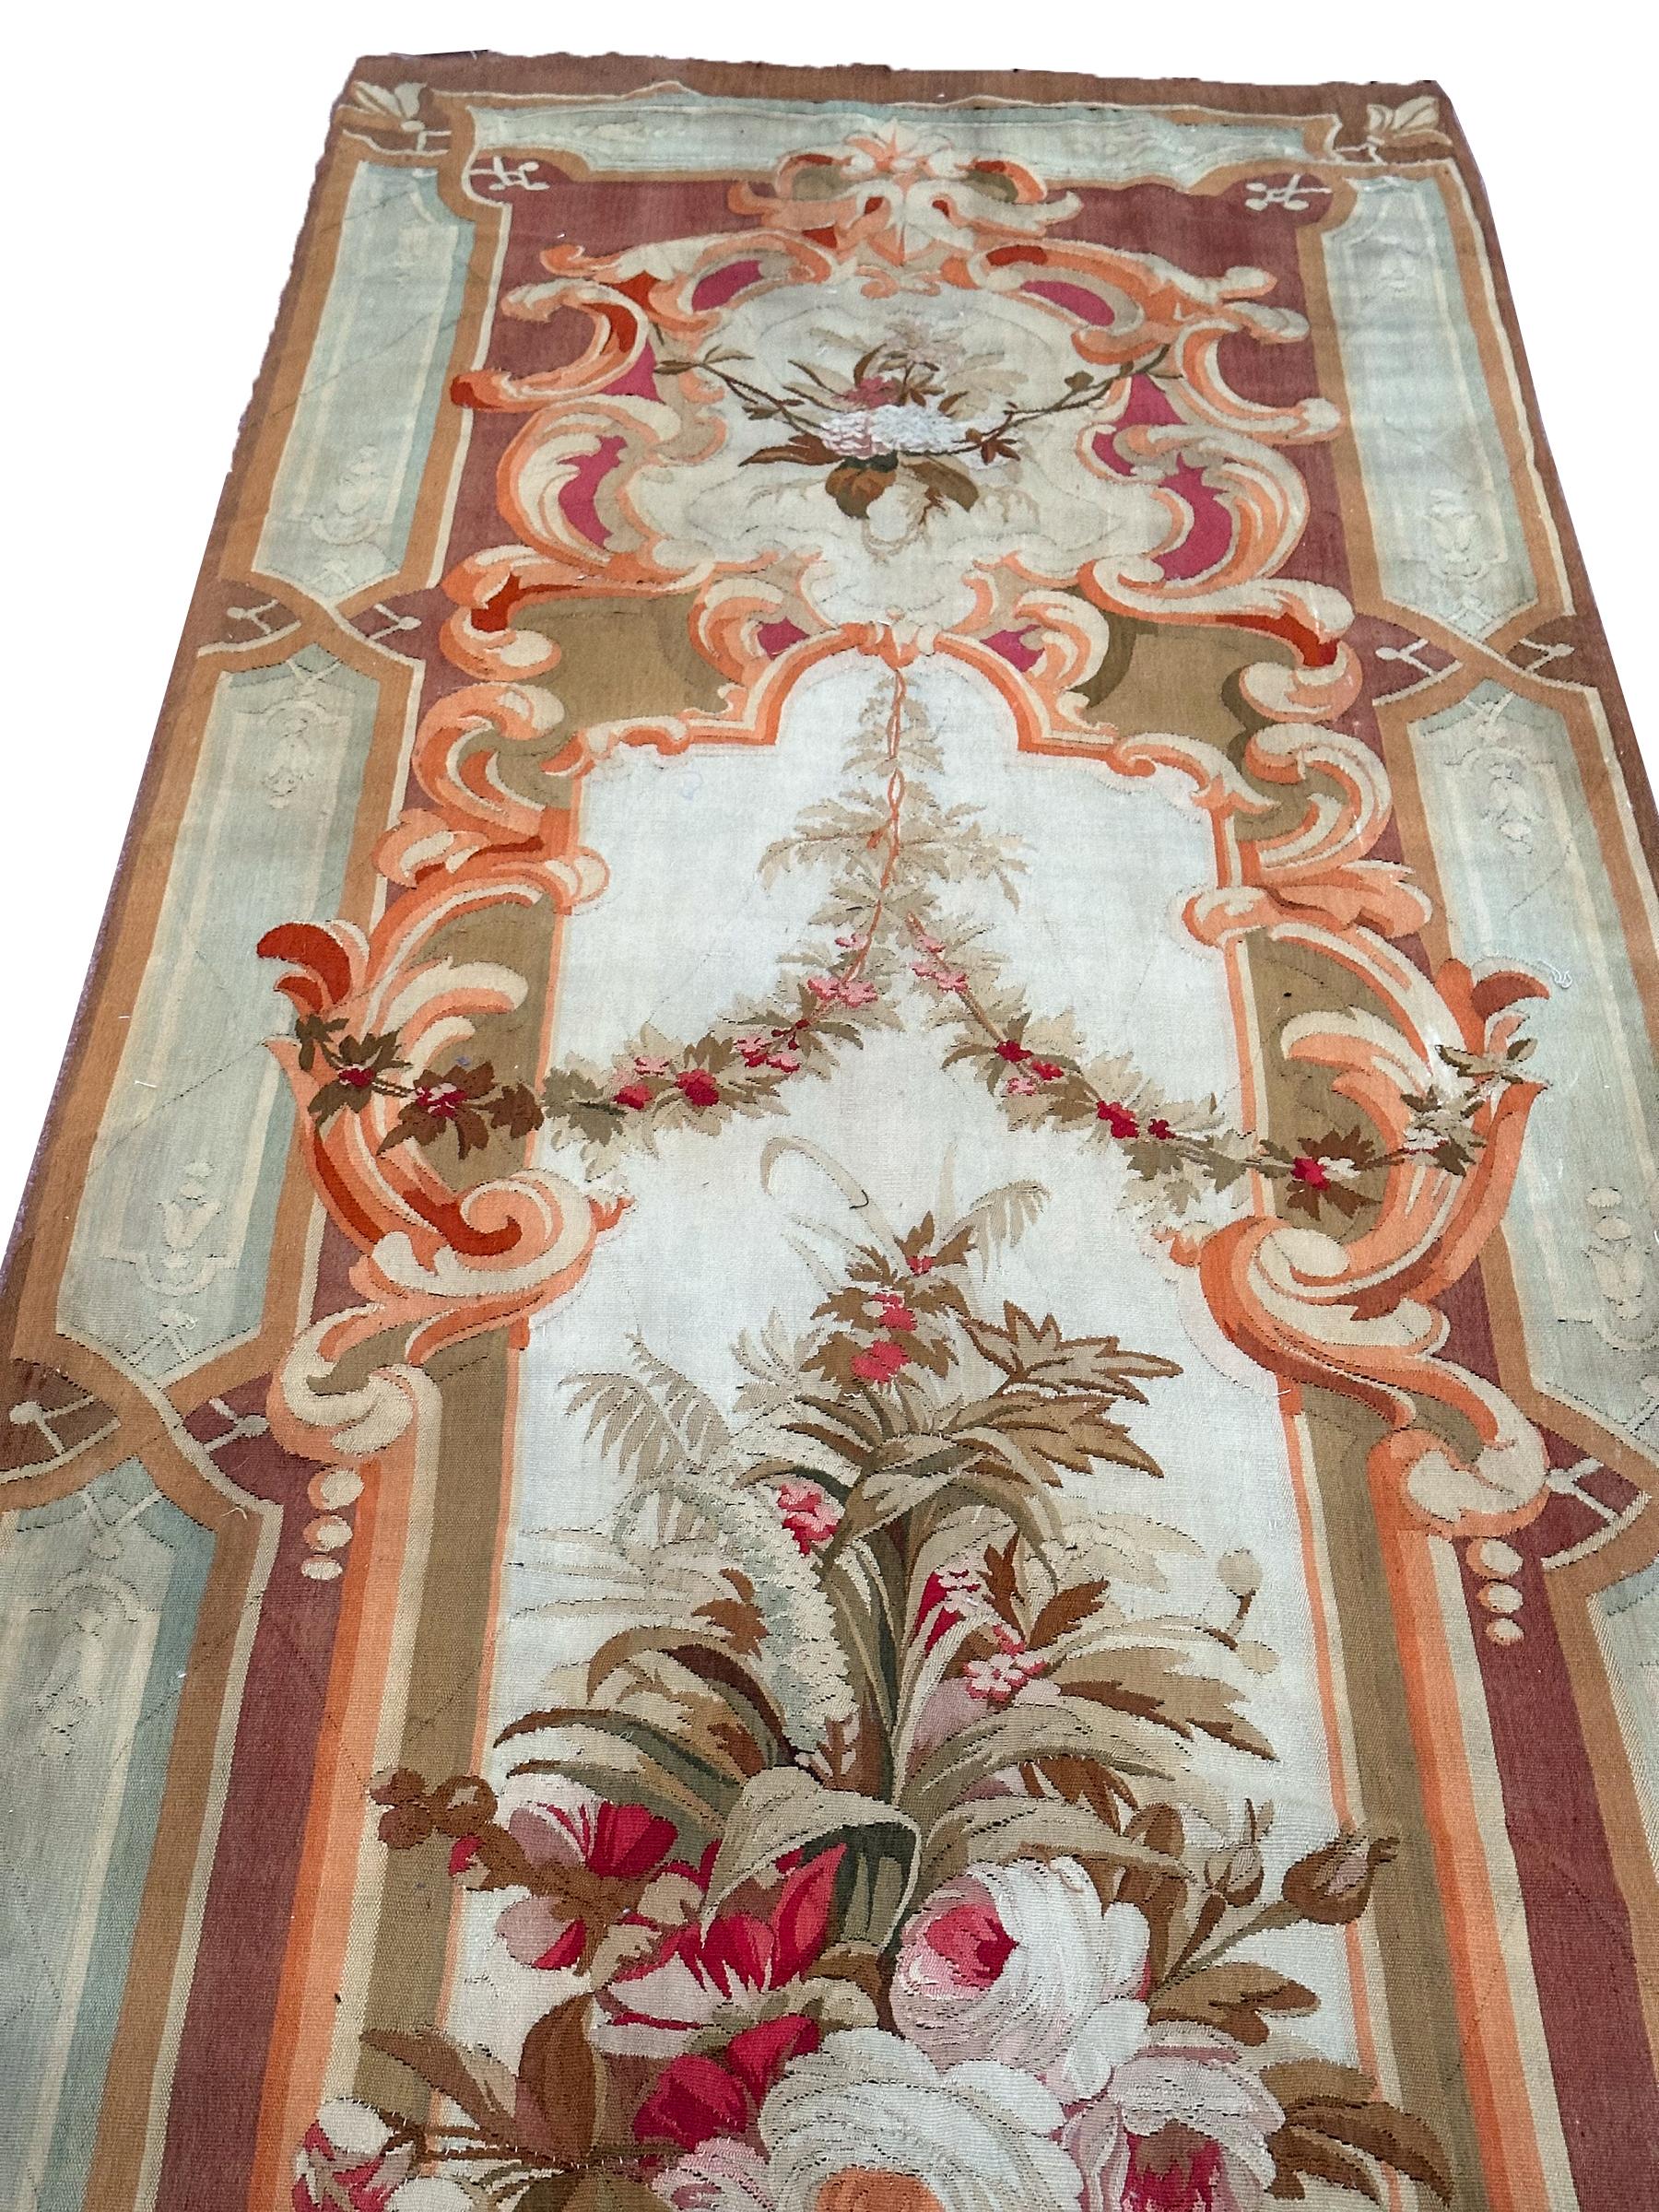 1920 Antique French Aubusson Tapestry Rug Floral Vase Runner 3x10 1880 97x287cm In Good Condition For Sale In New York, NY